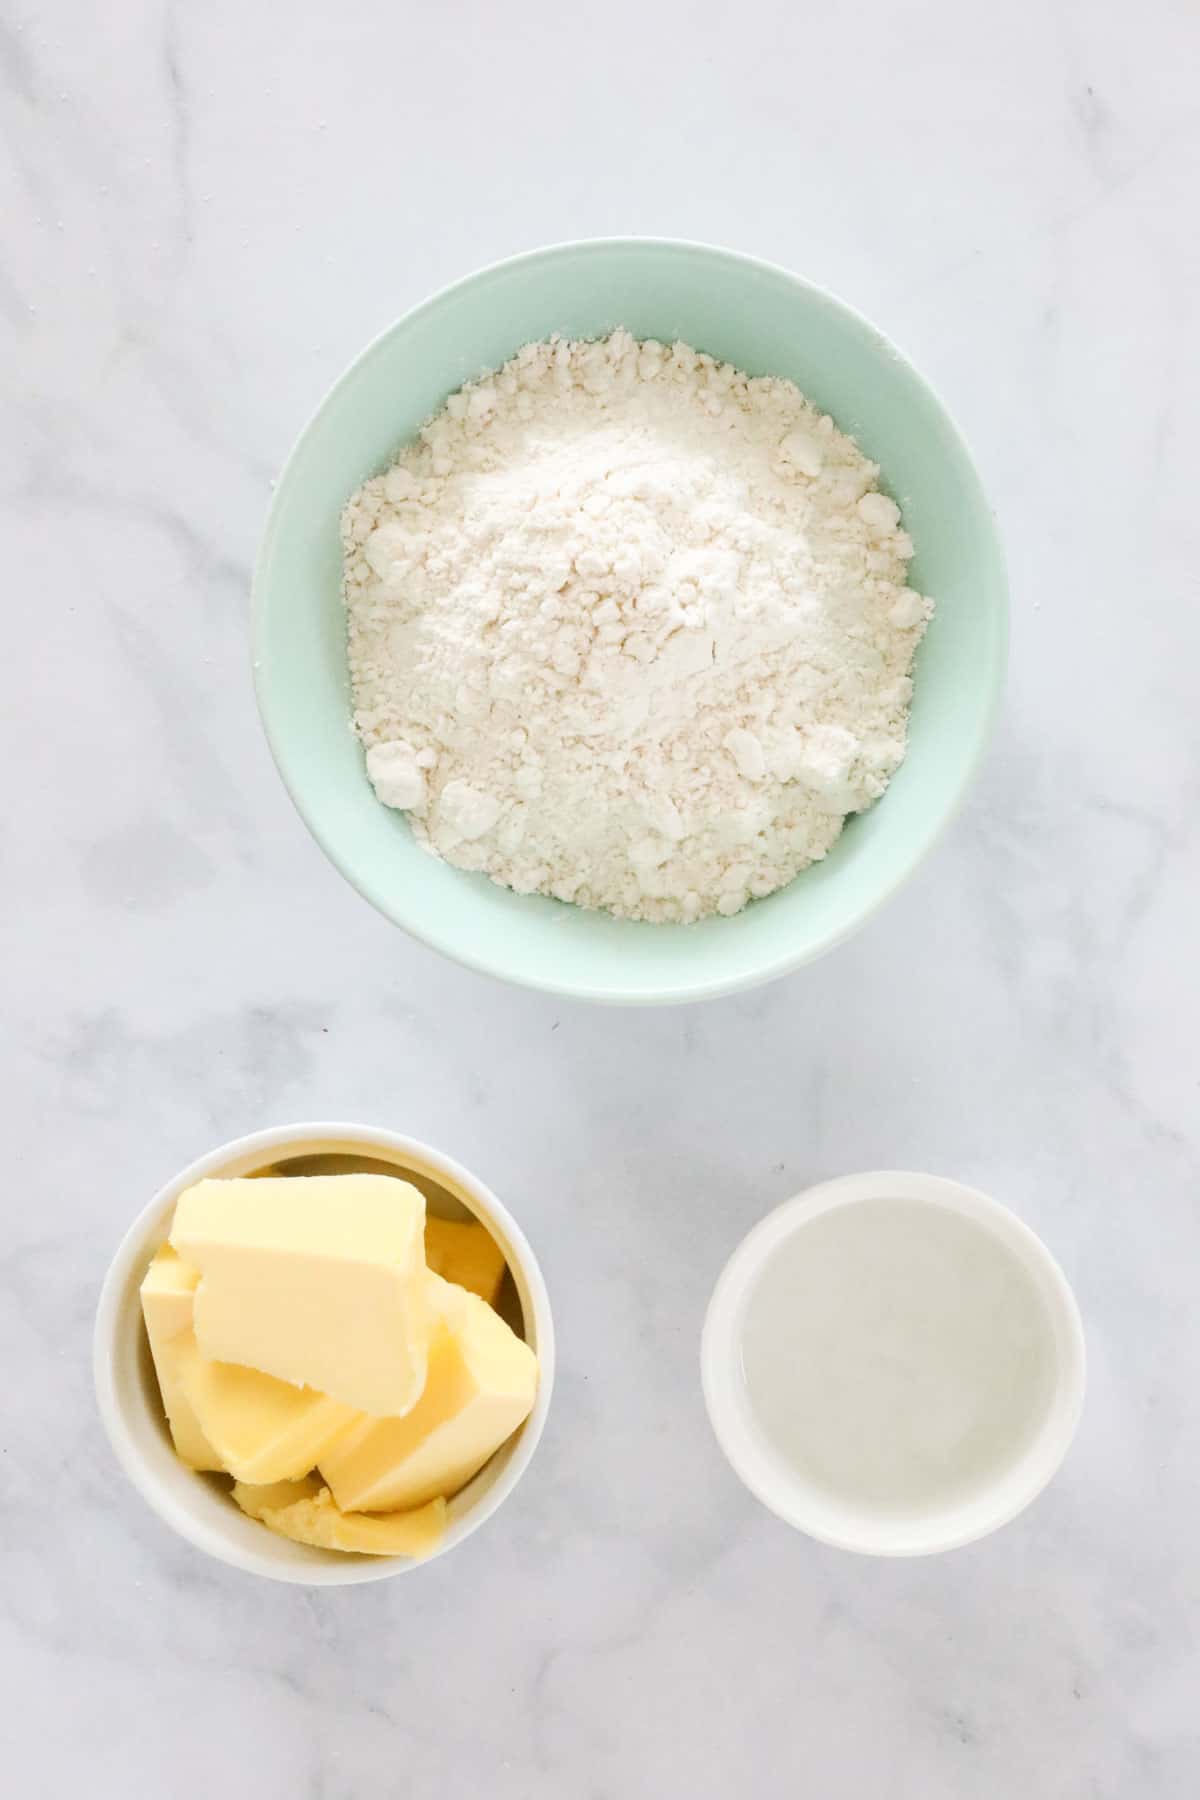 Bowls of flour, butter and water.